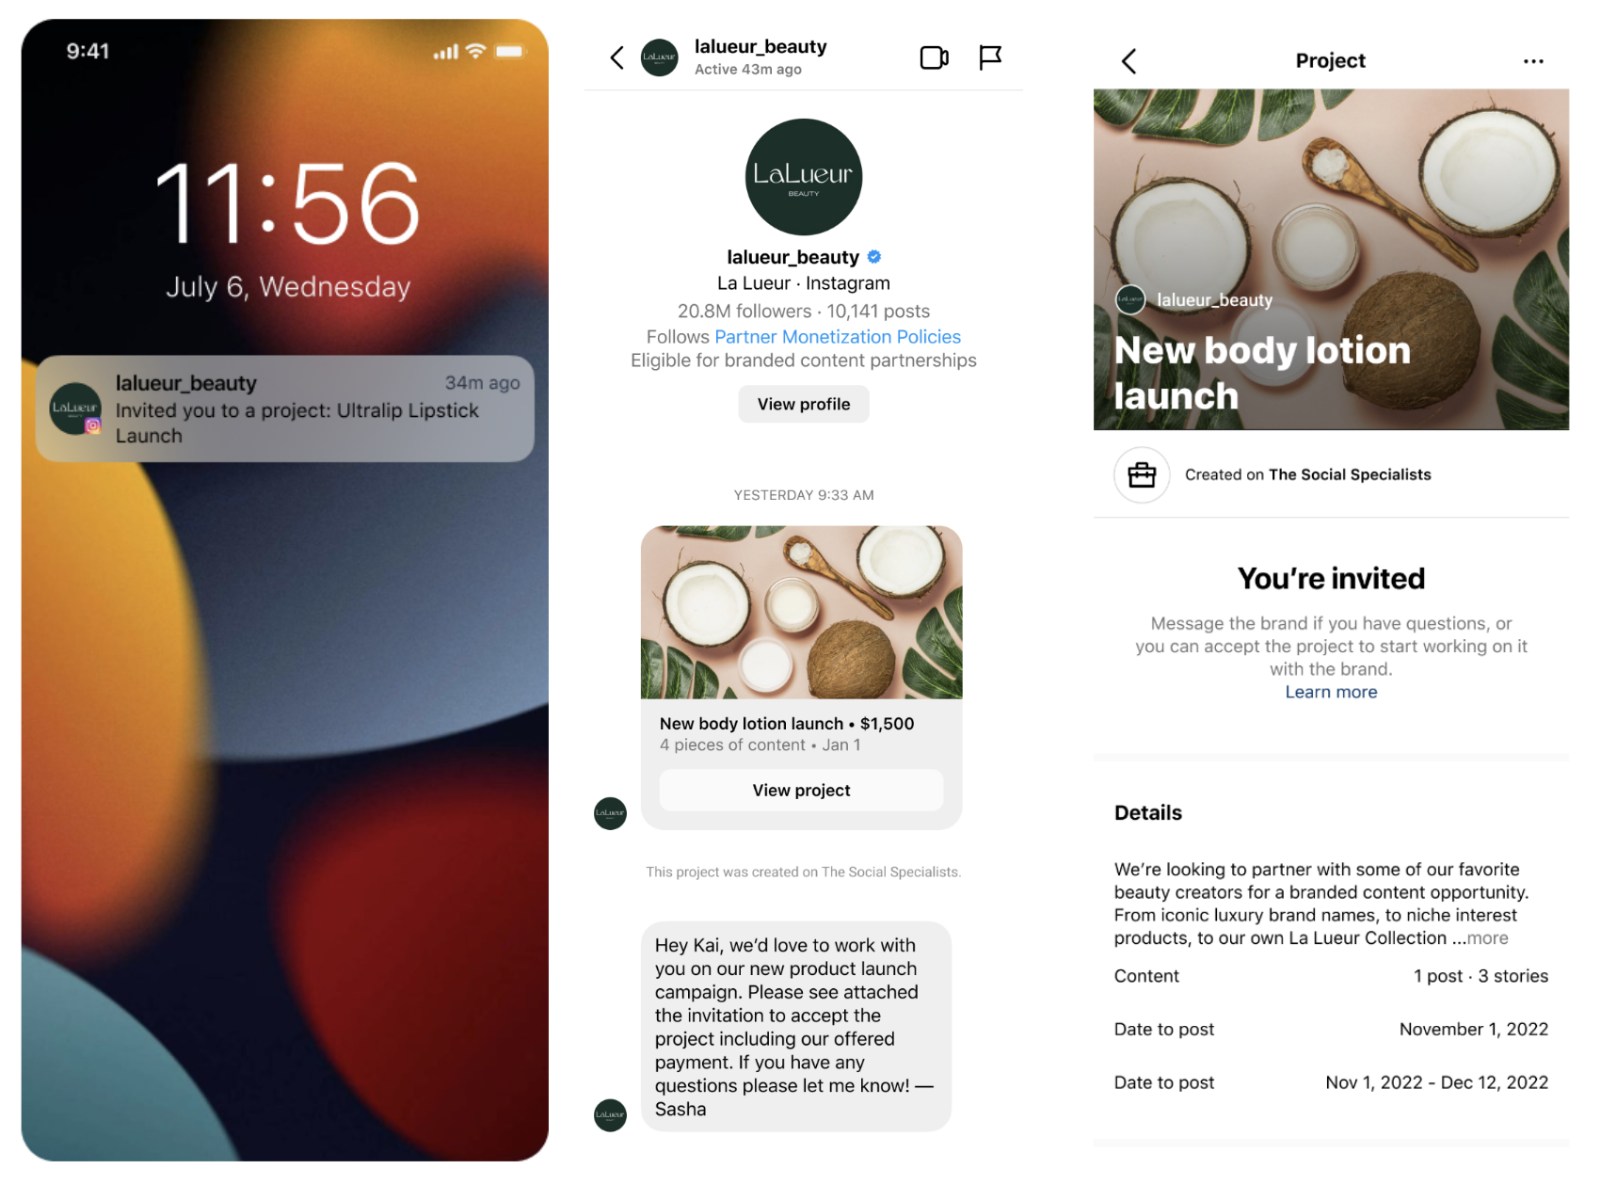 Instagram adds new features to its creator marketplace, expands access to brand agencies